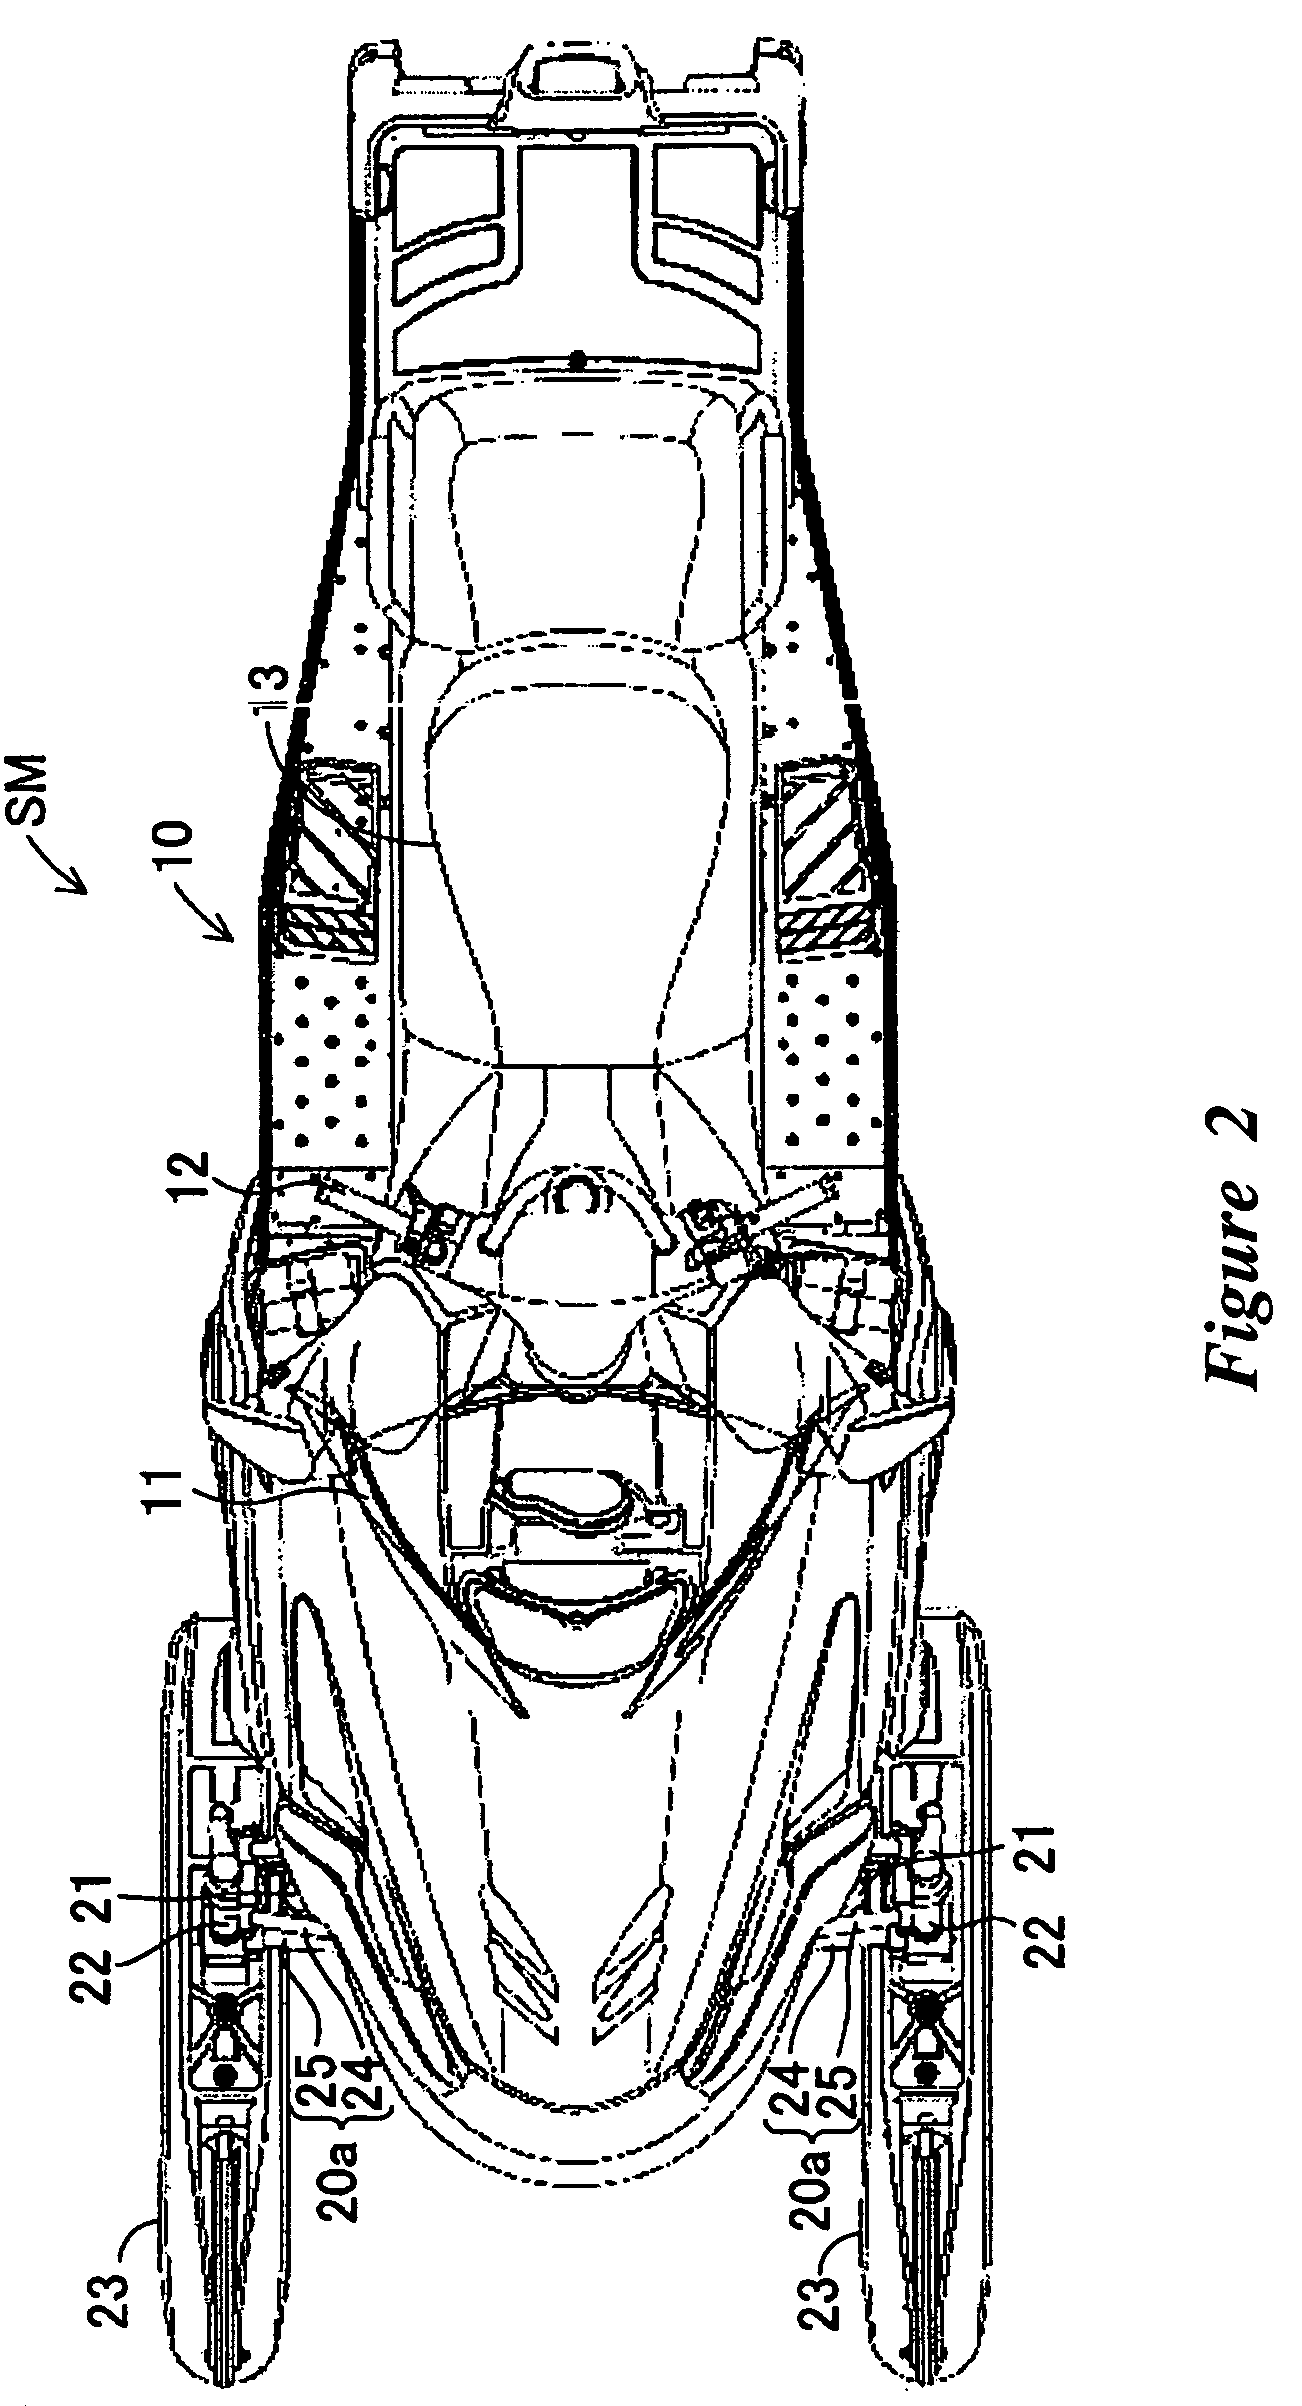 Front suspension arms